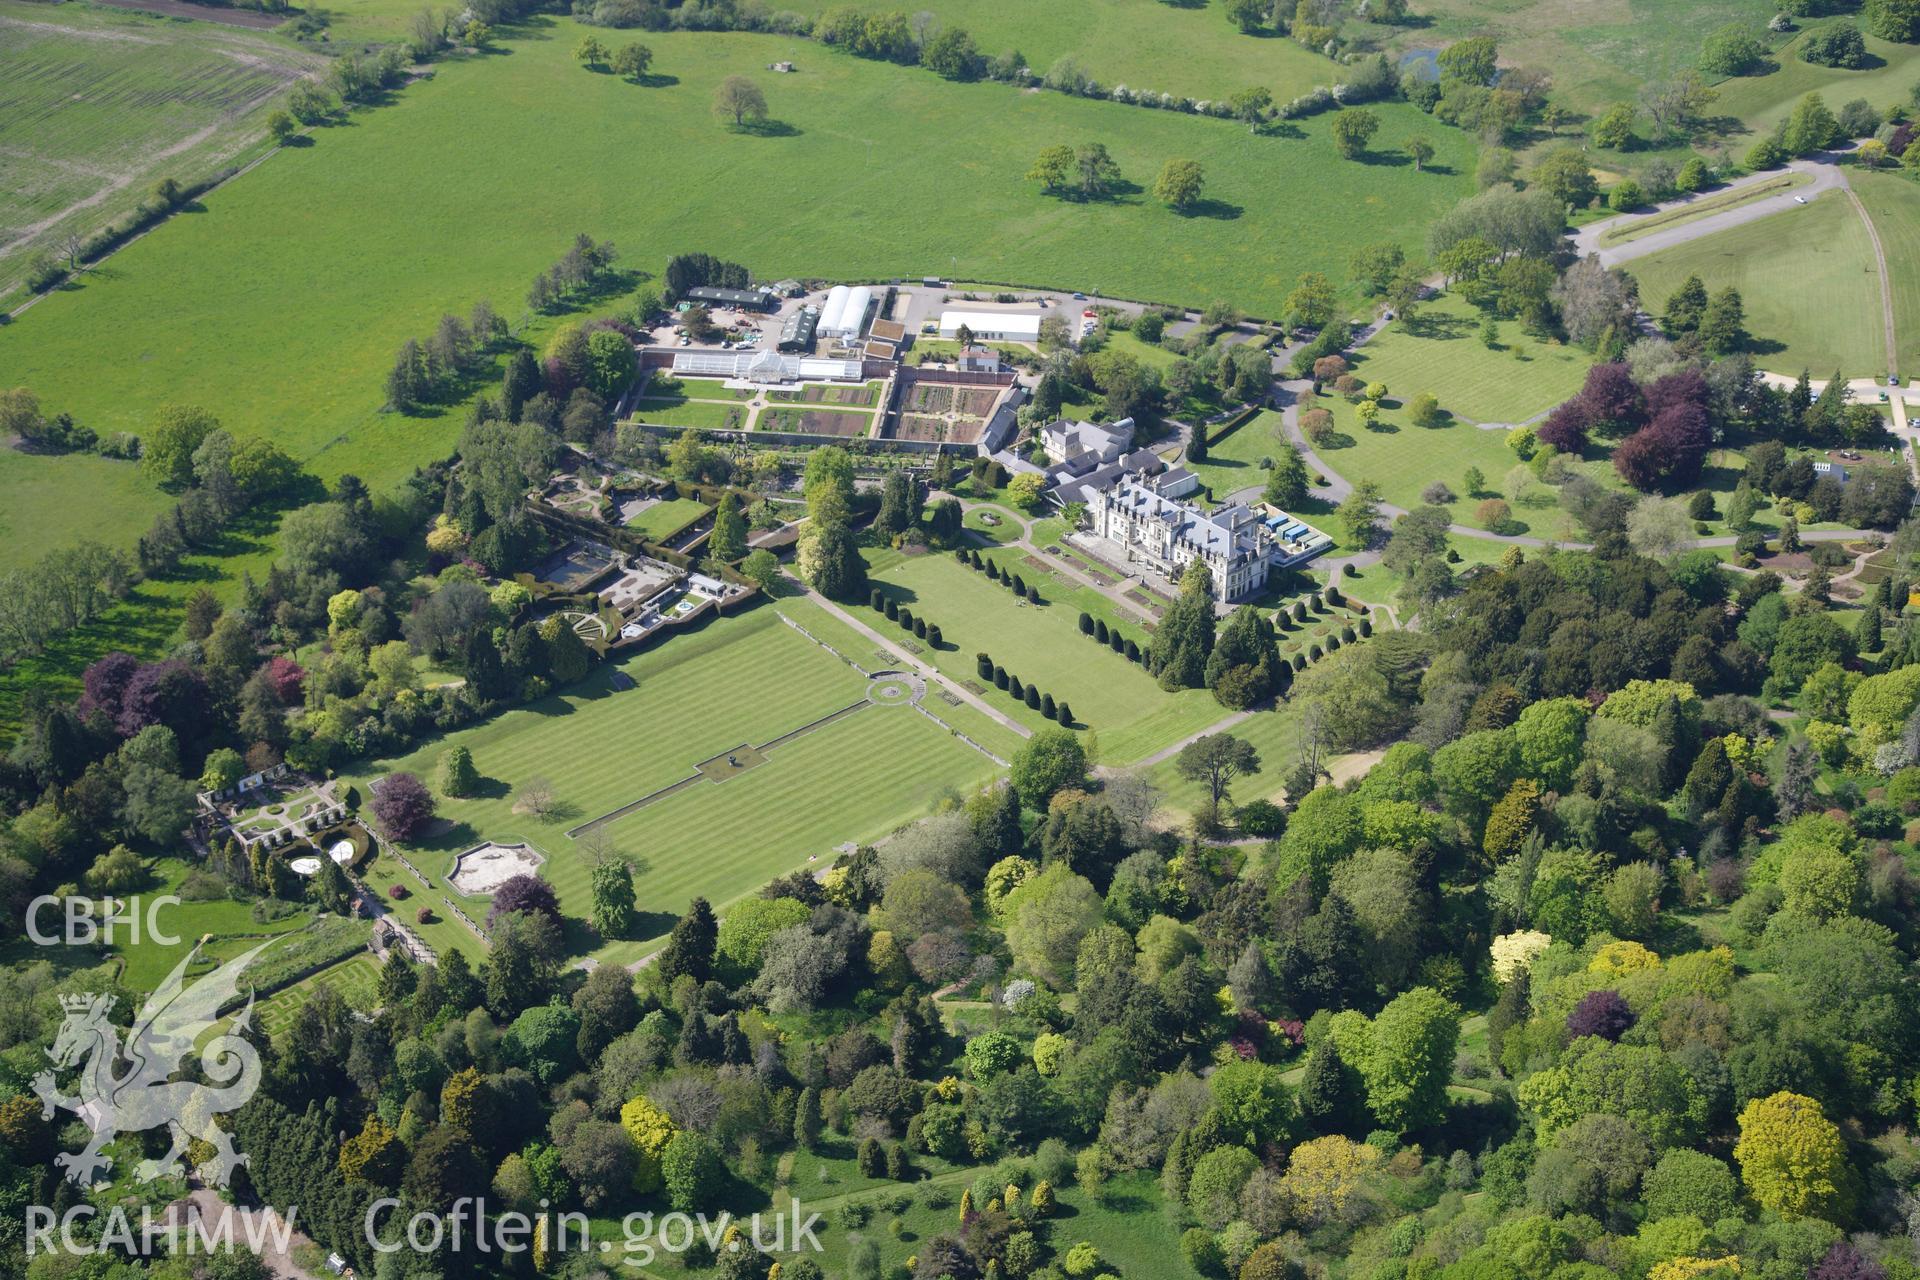 RCAHMW colour oblique photograph of Dyffryn Gardens and Dyffryn House, viewed from the south-east. Taken by Toby Driver on 22/05/2012.